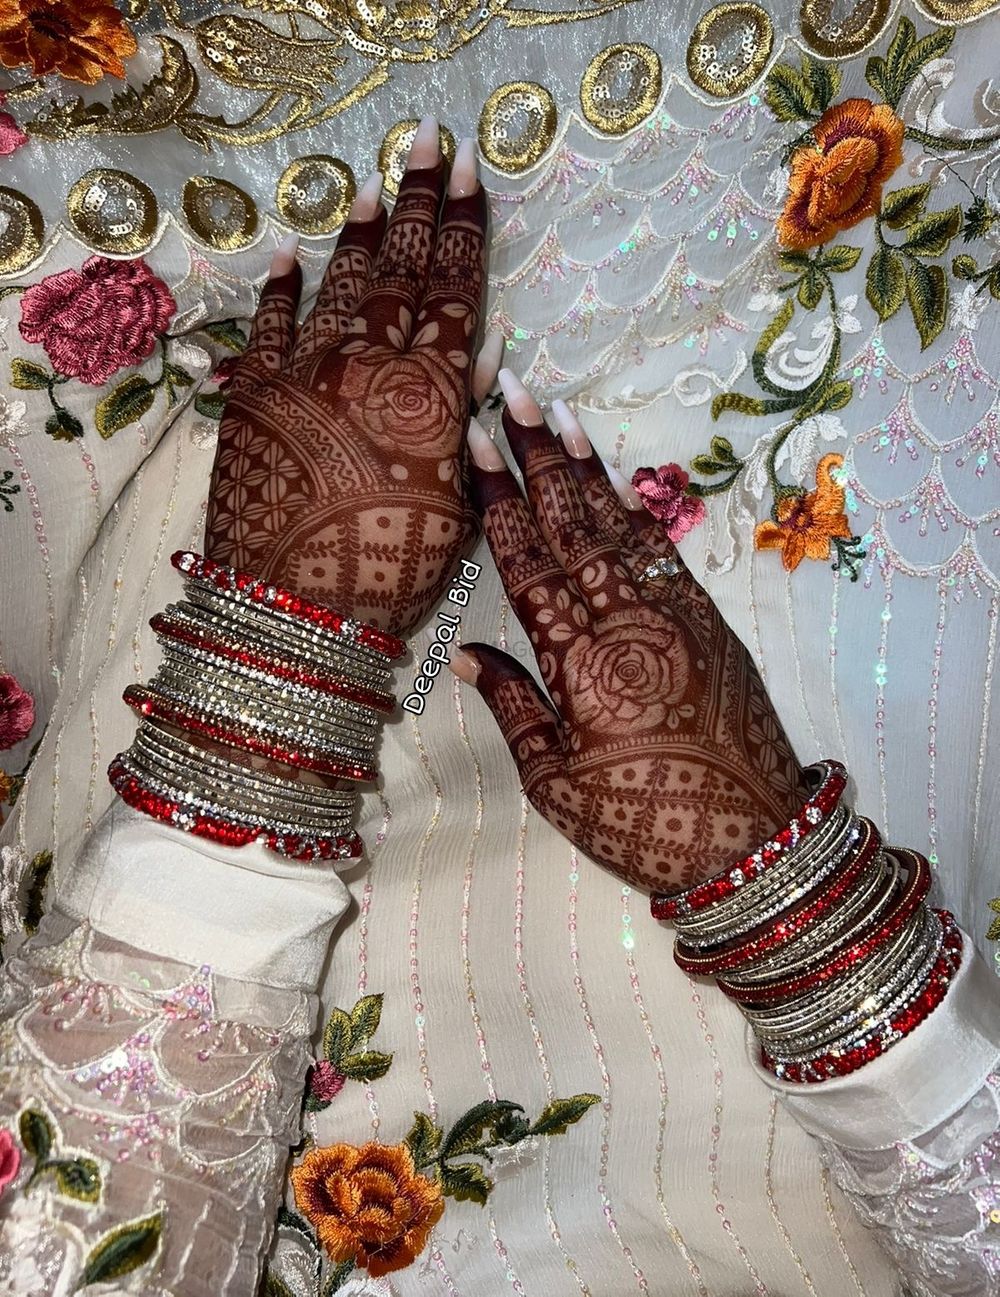 Photo From Indian Mehndi for Siders - By Deepal Henna Art